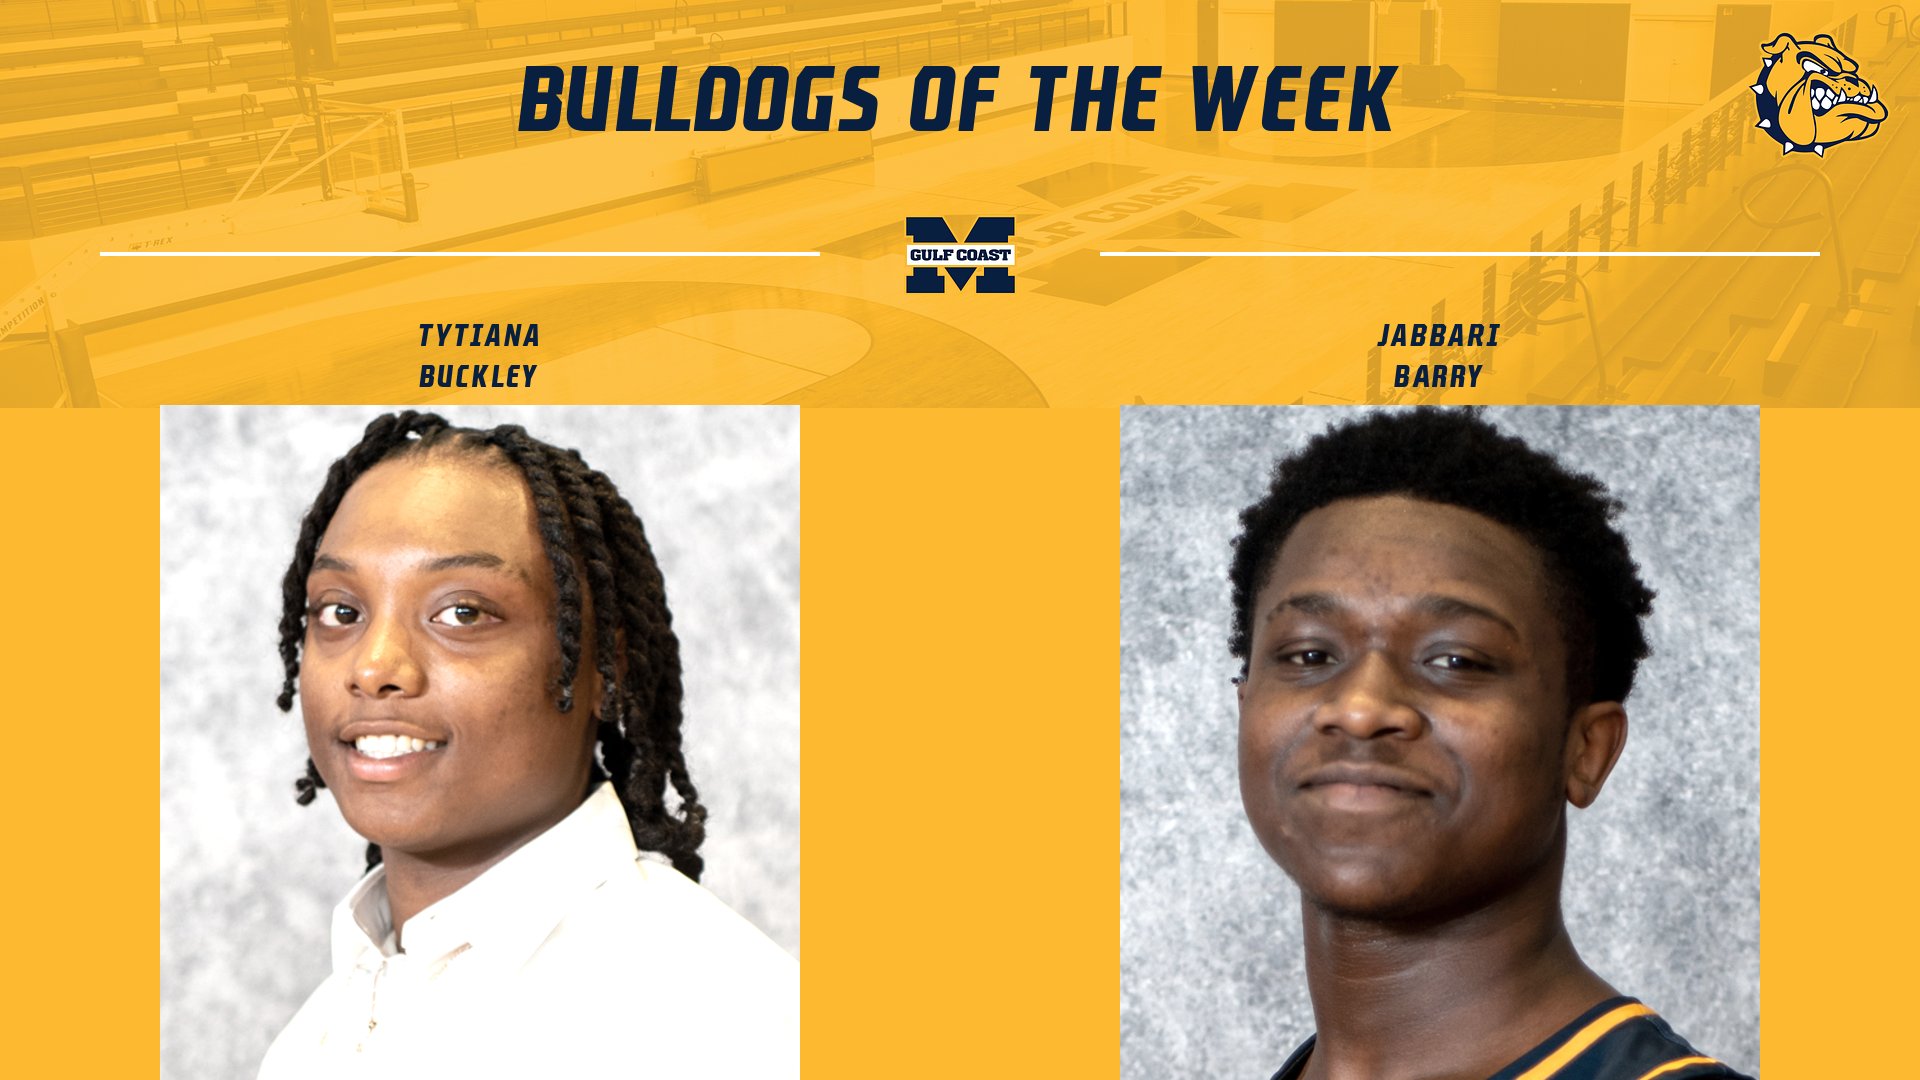 Buckley, Barry named Bulldogs of the Week